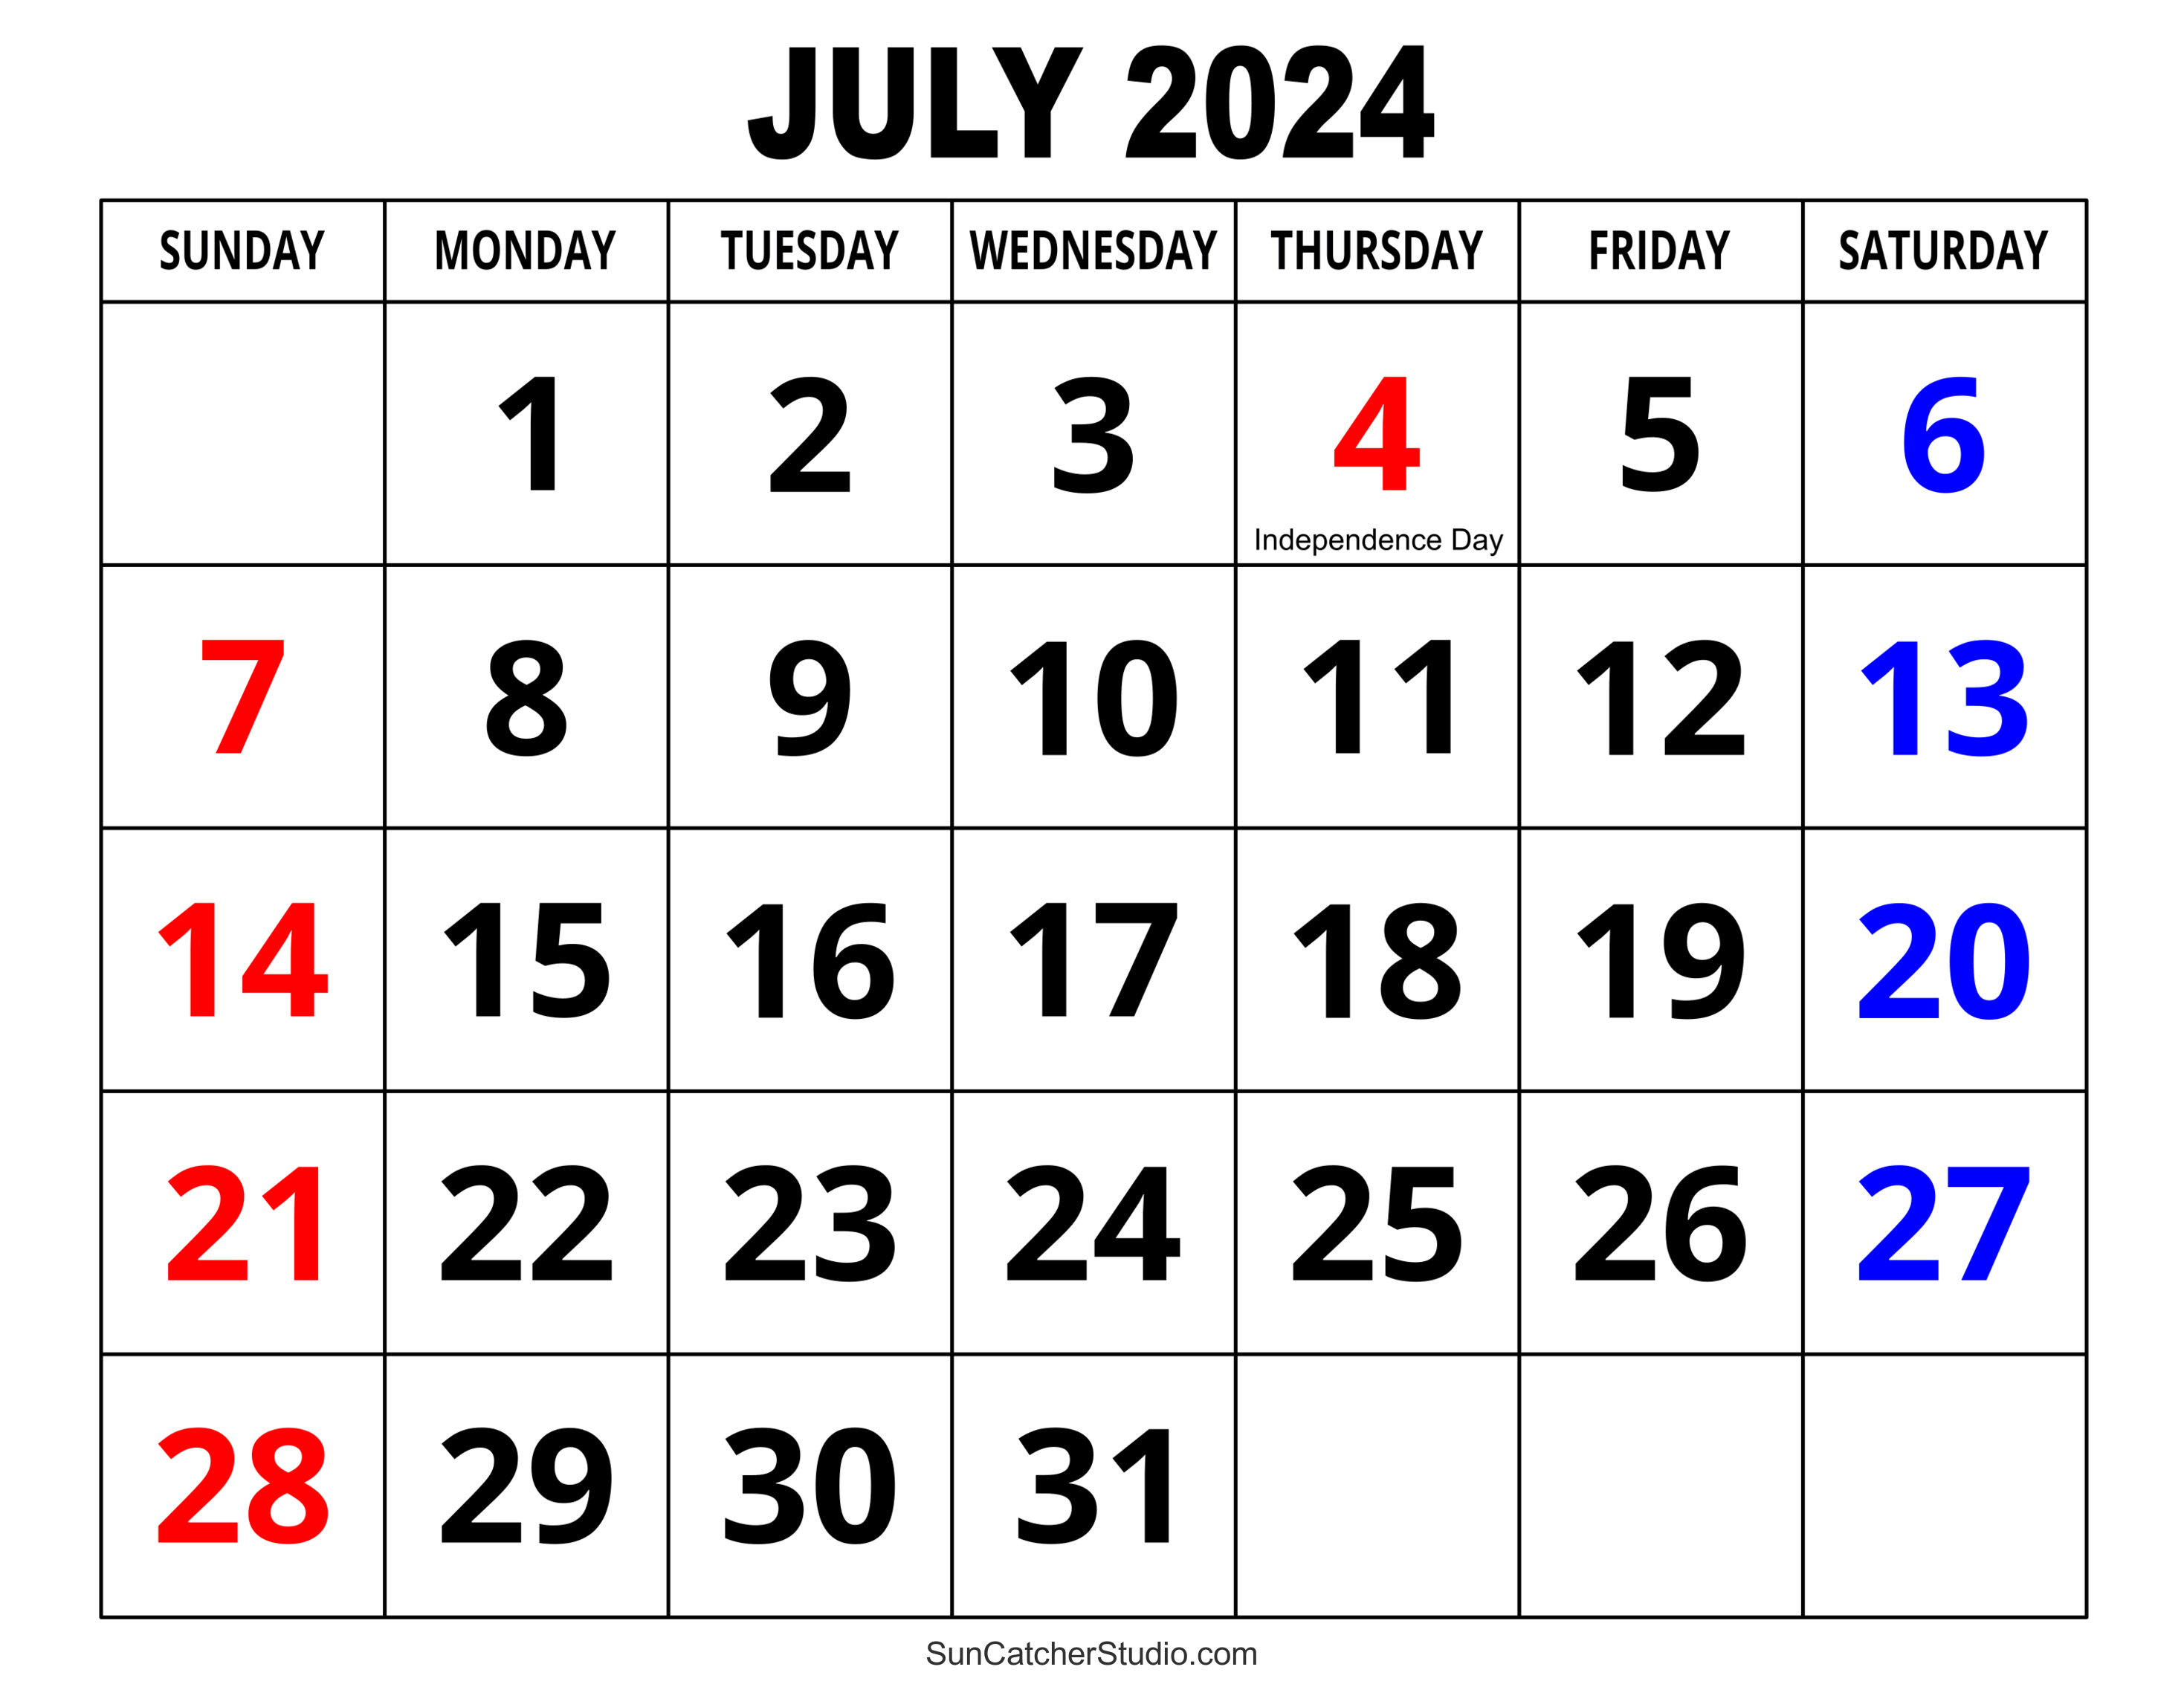 July 2024 Calendar (Free Printable) – Diy Projects, Patterns regarding 30 July 2024 Calendar Printable